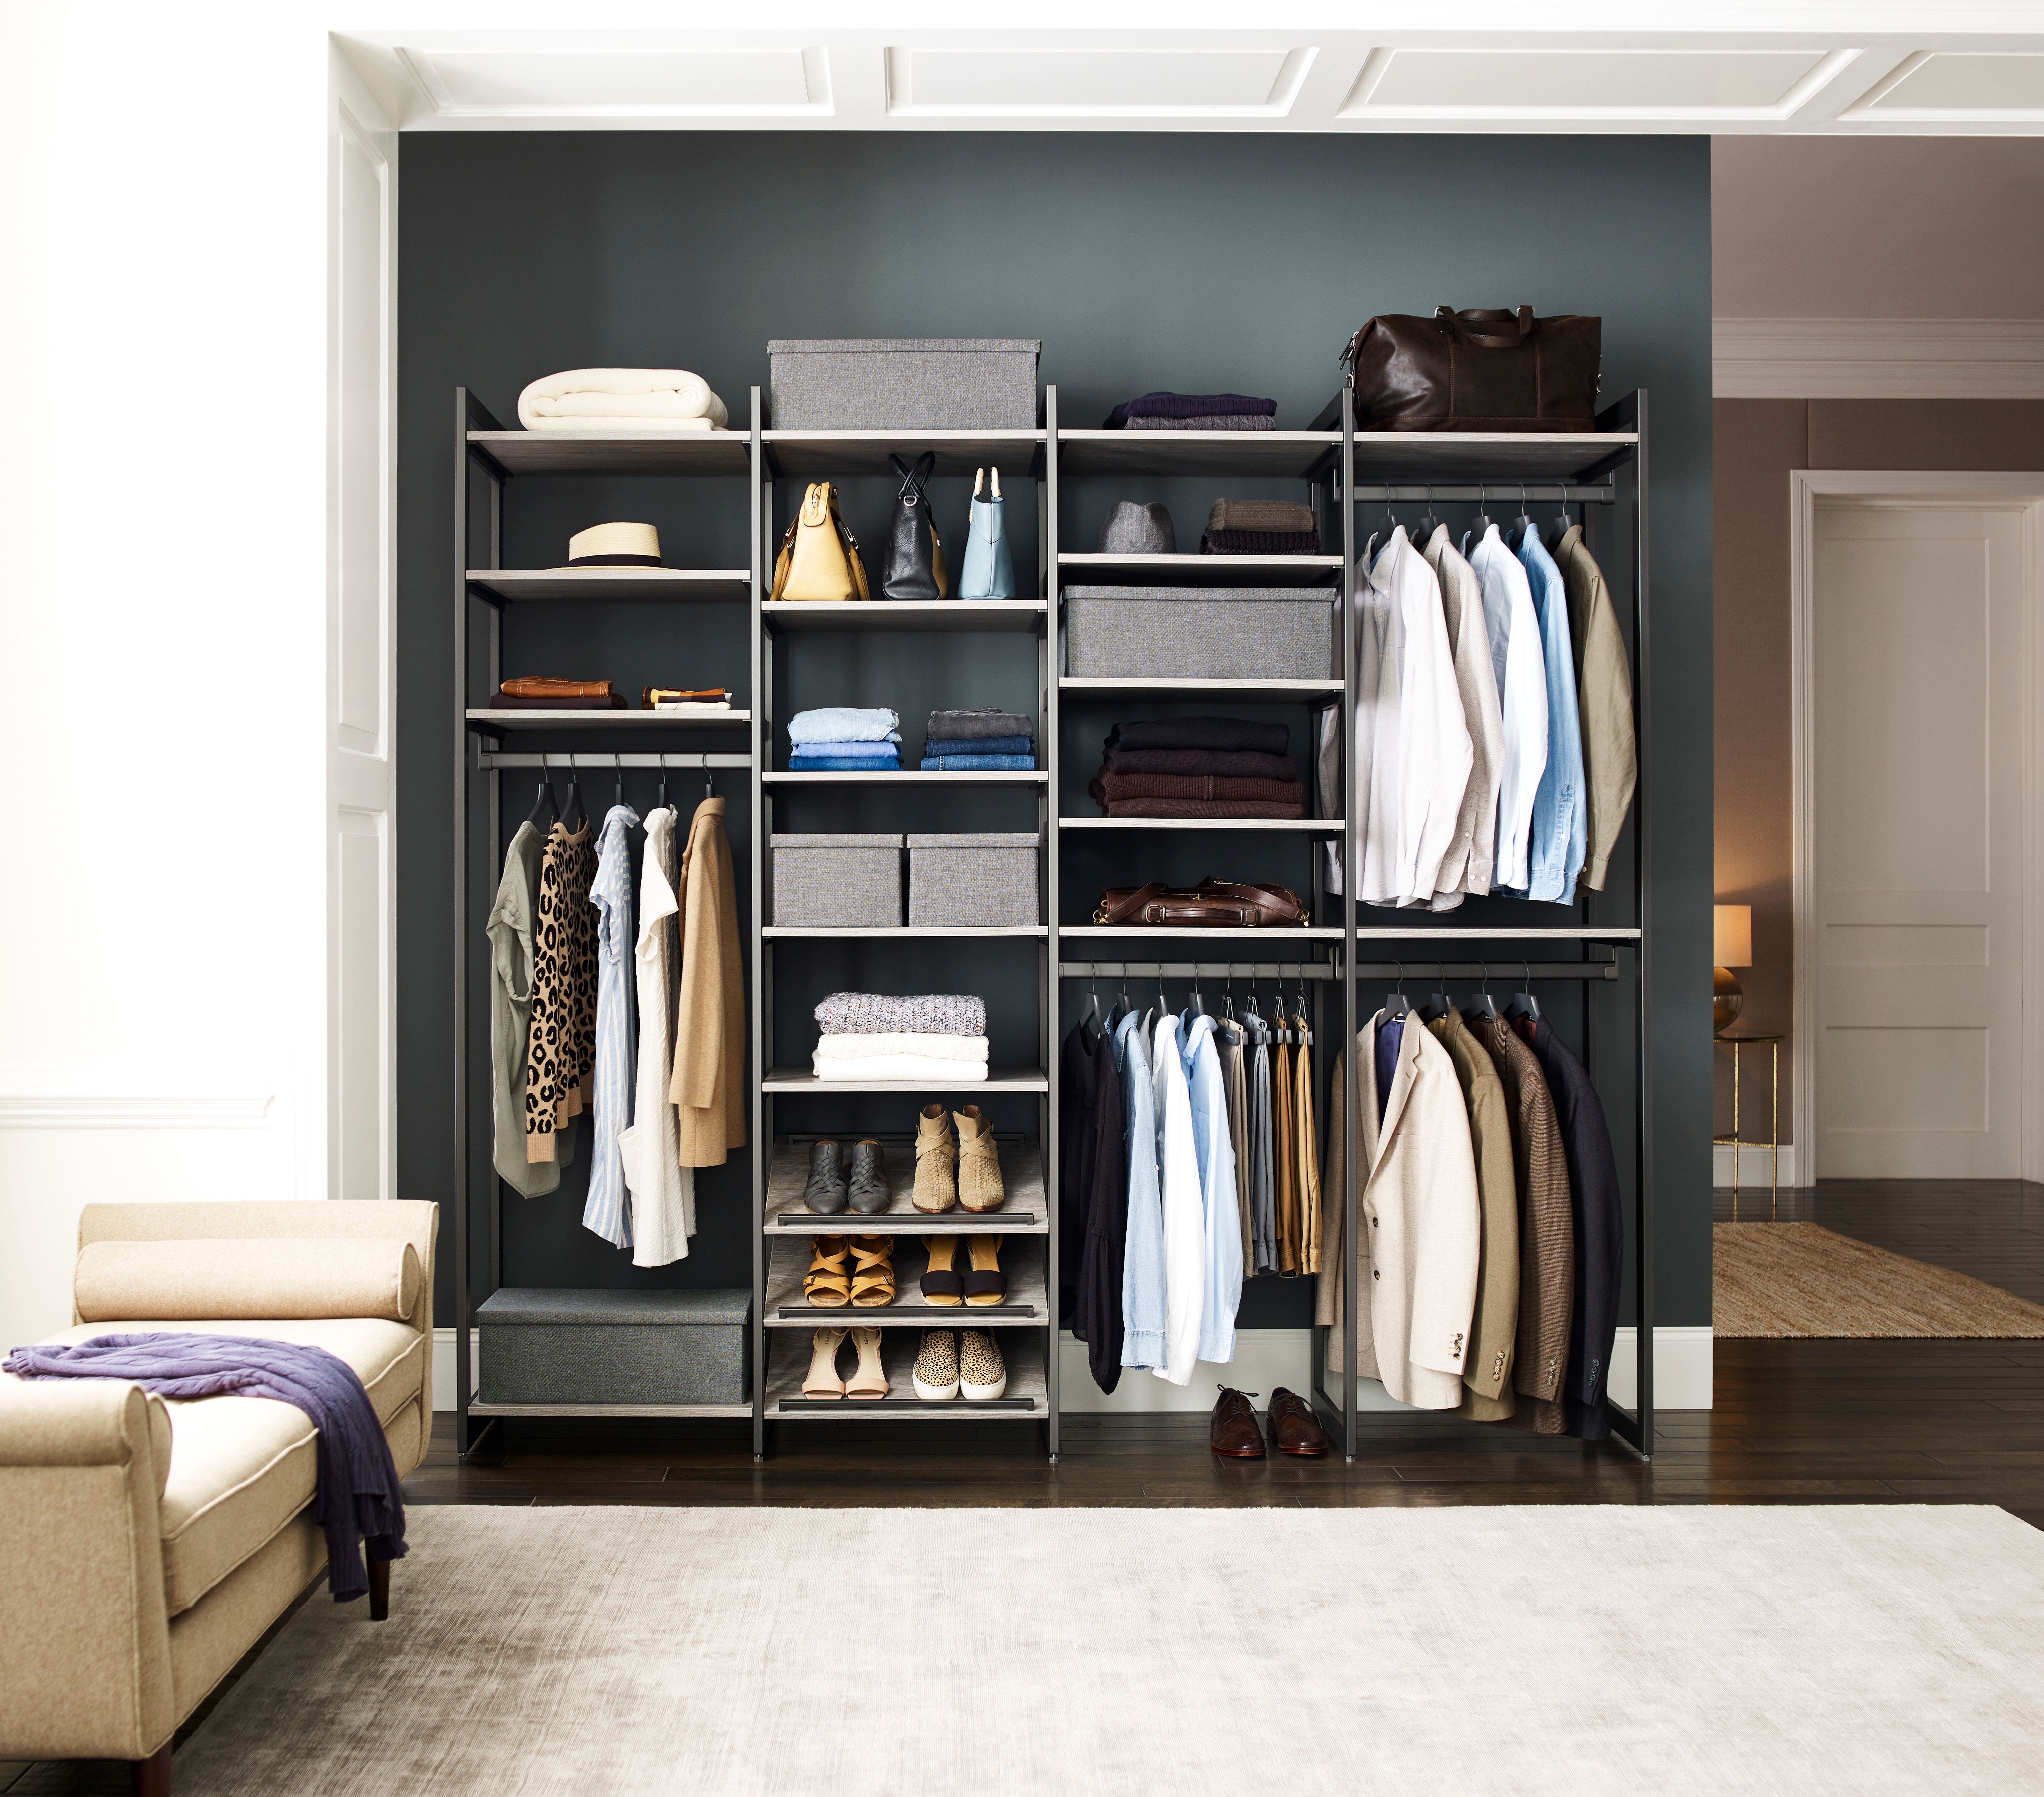 8 Closet Systems That Add Storage Space to Any Home, Architectural Digest